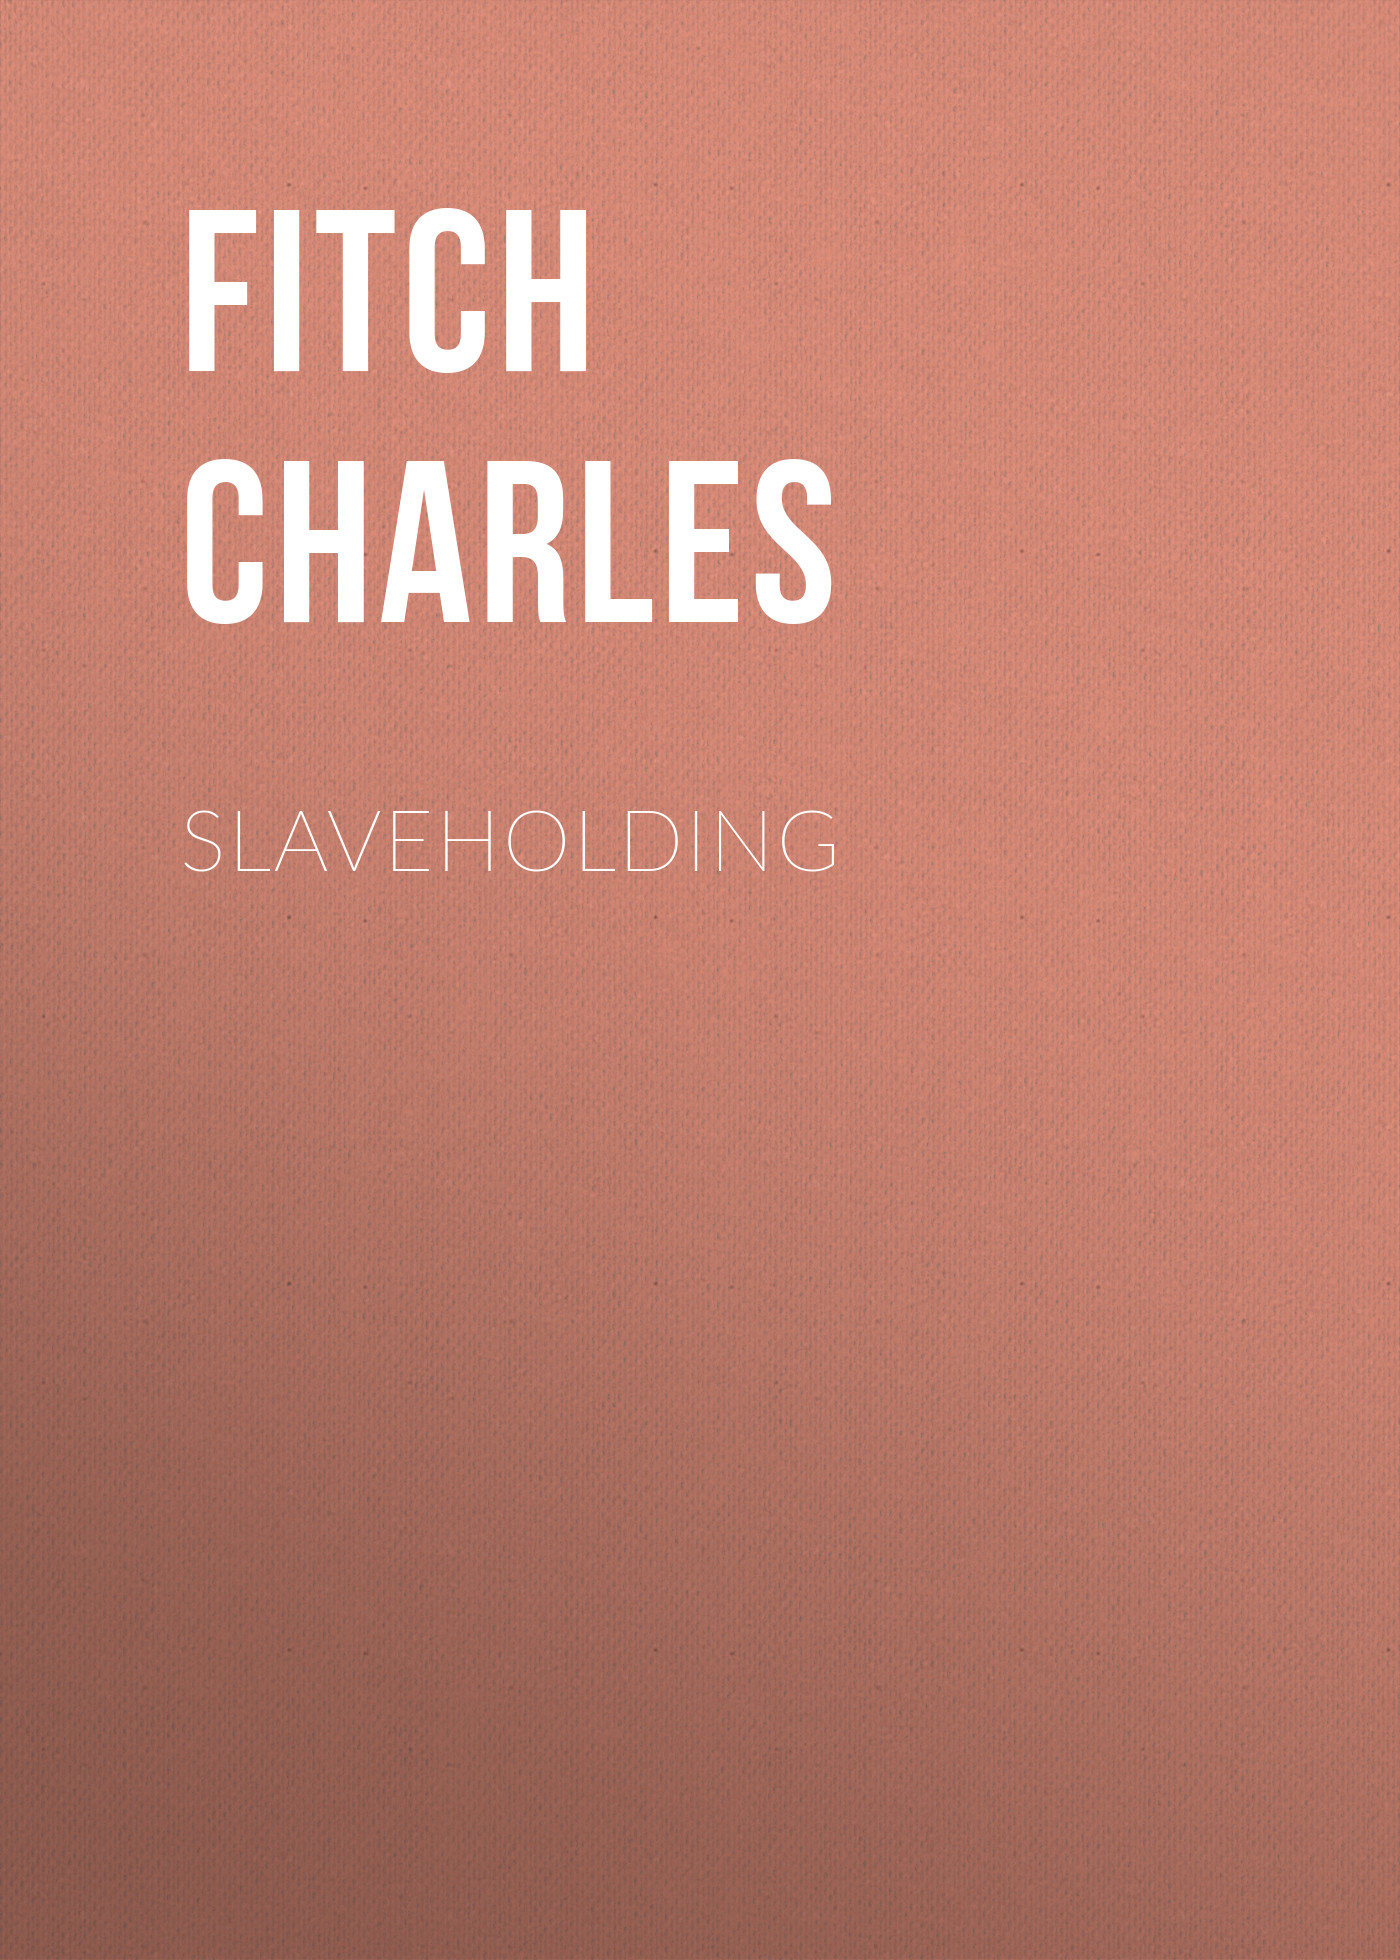 Fitch Charles Slaveholding